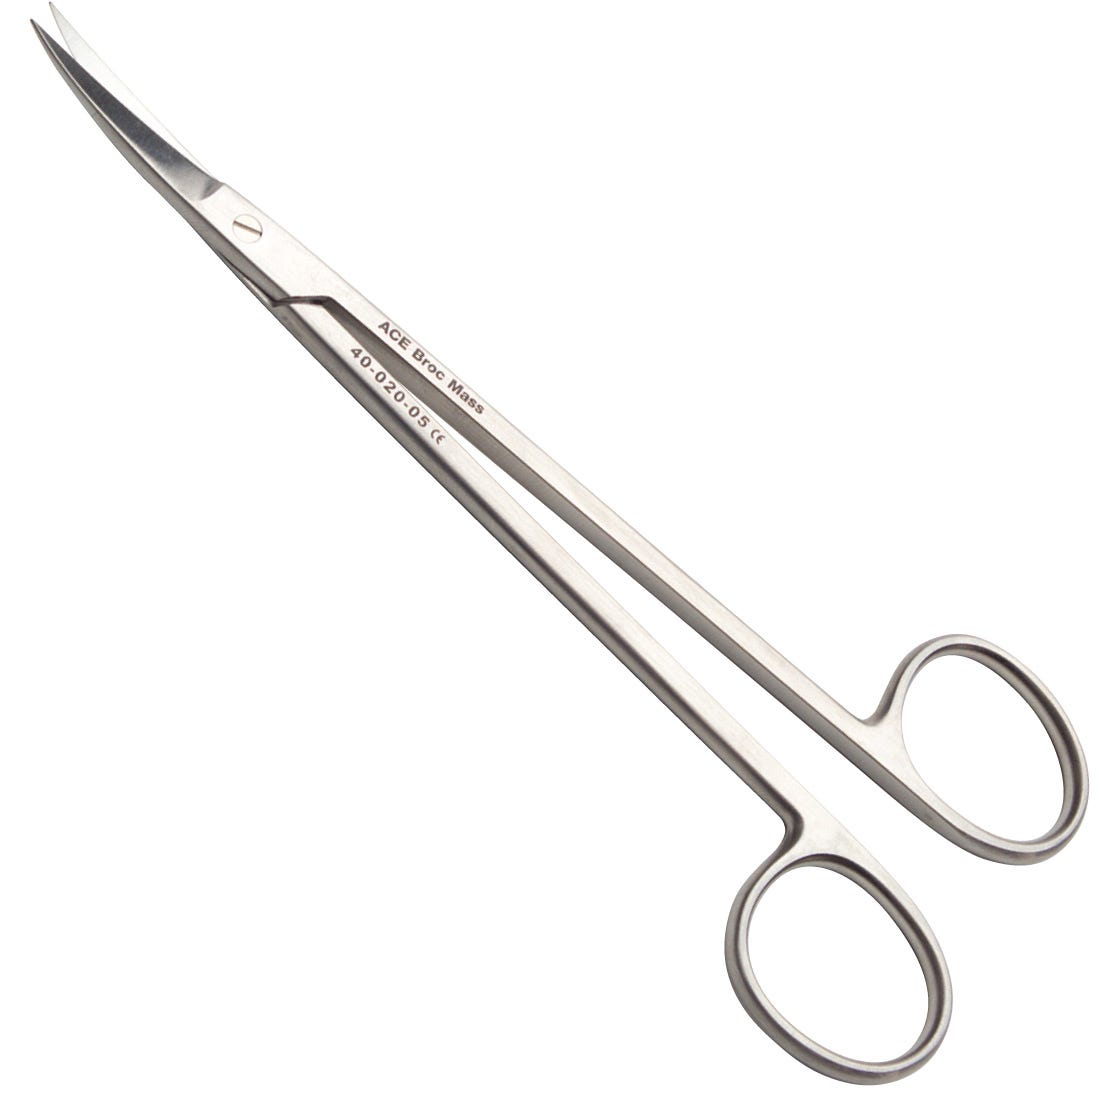 ACE #1 Kelly Scissors,  curved, smooth